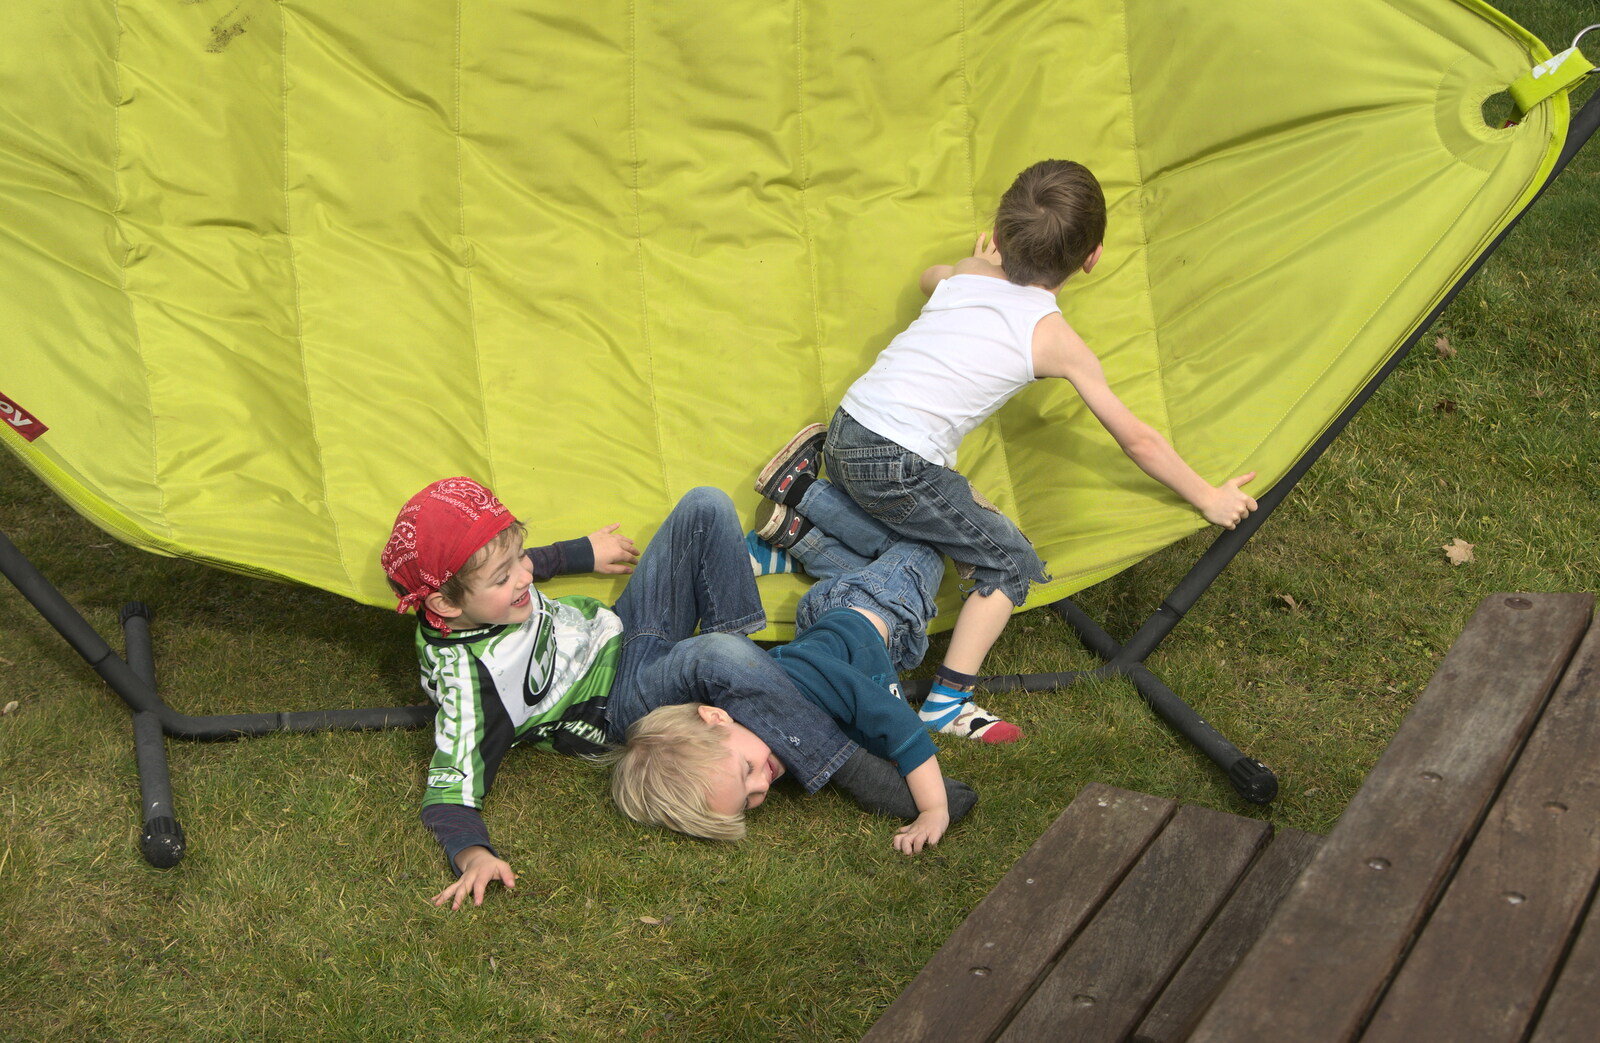 The boys pile off a hammock from A Crashed Car and Greenhouse Demolition, Brome, Suffolk - 20th March 2015